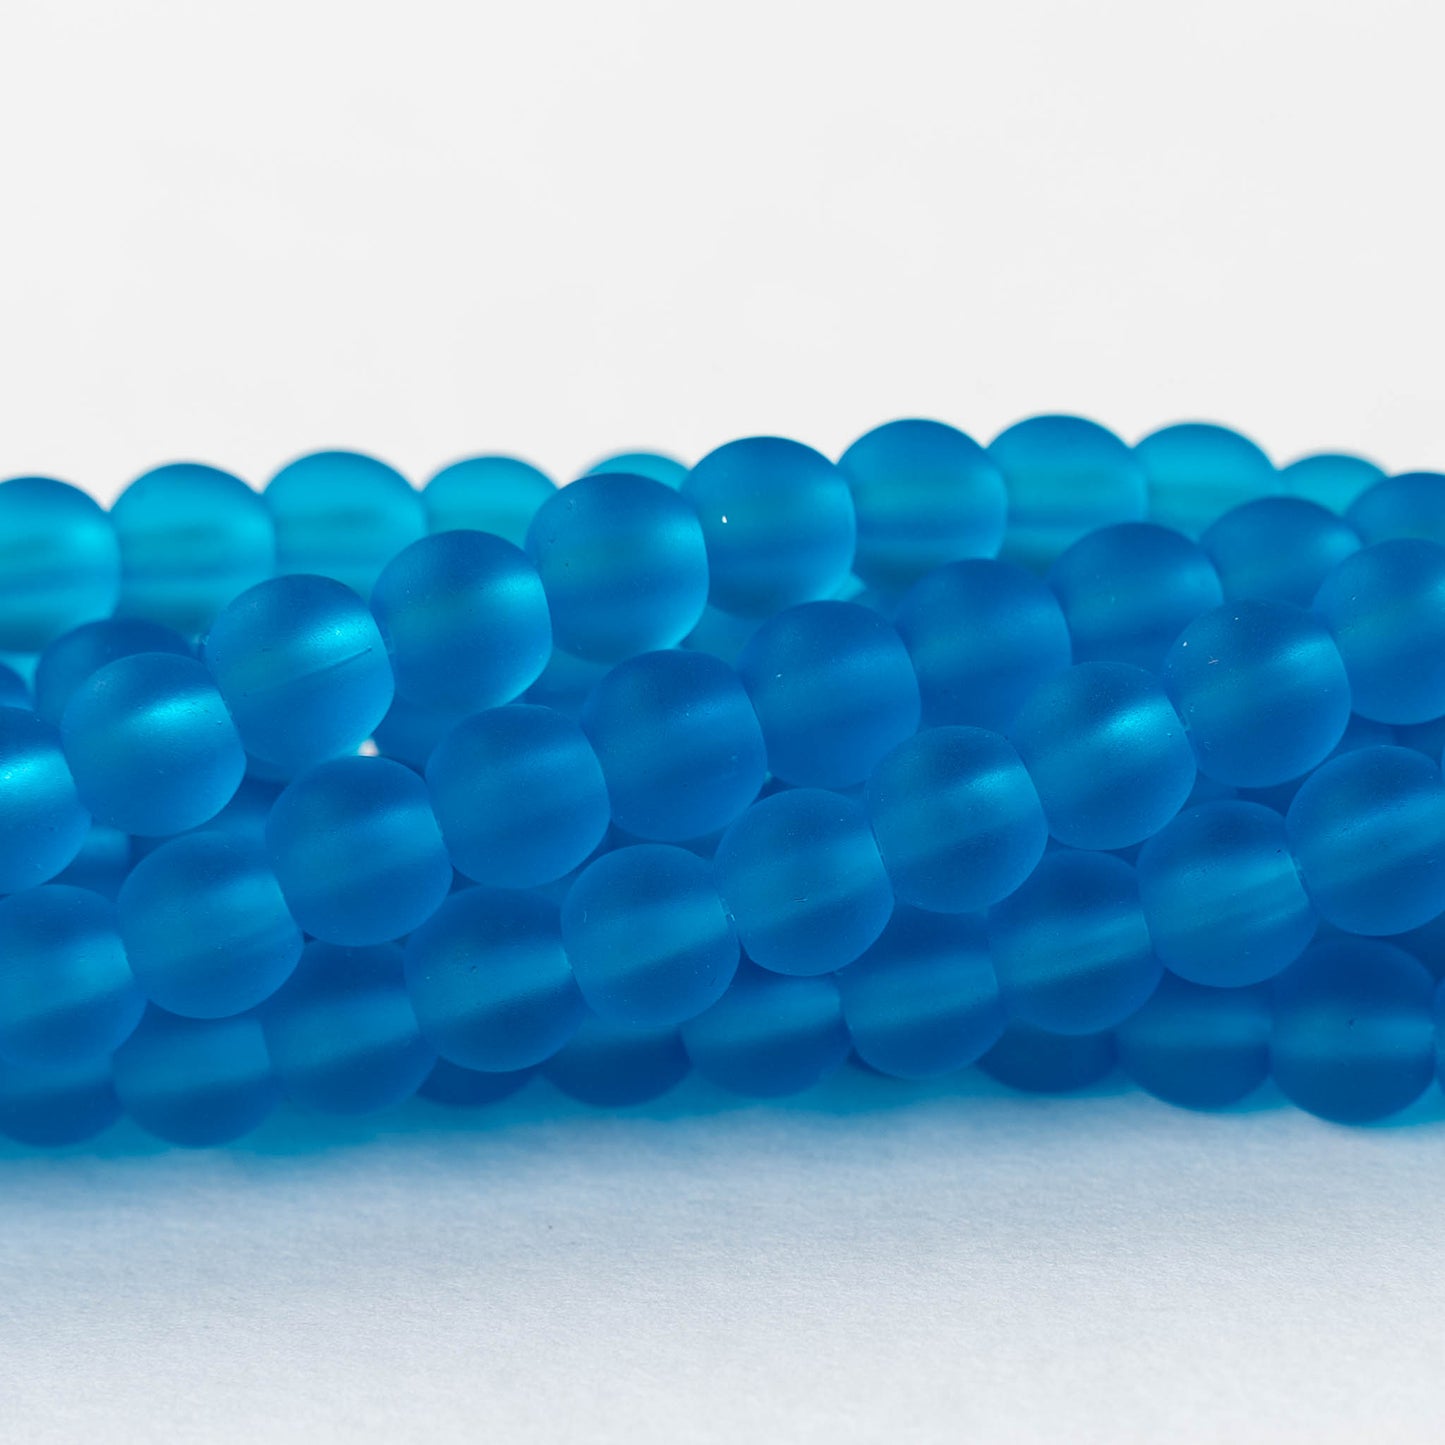 6mm Round Beads - Pacific Blue - 70 beads